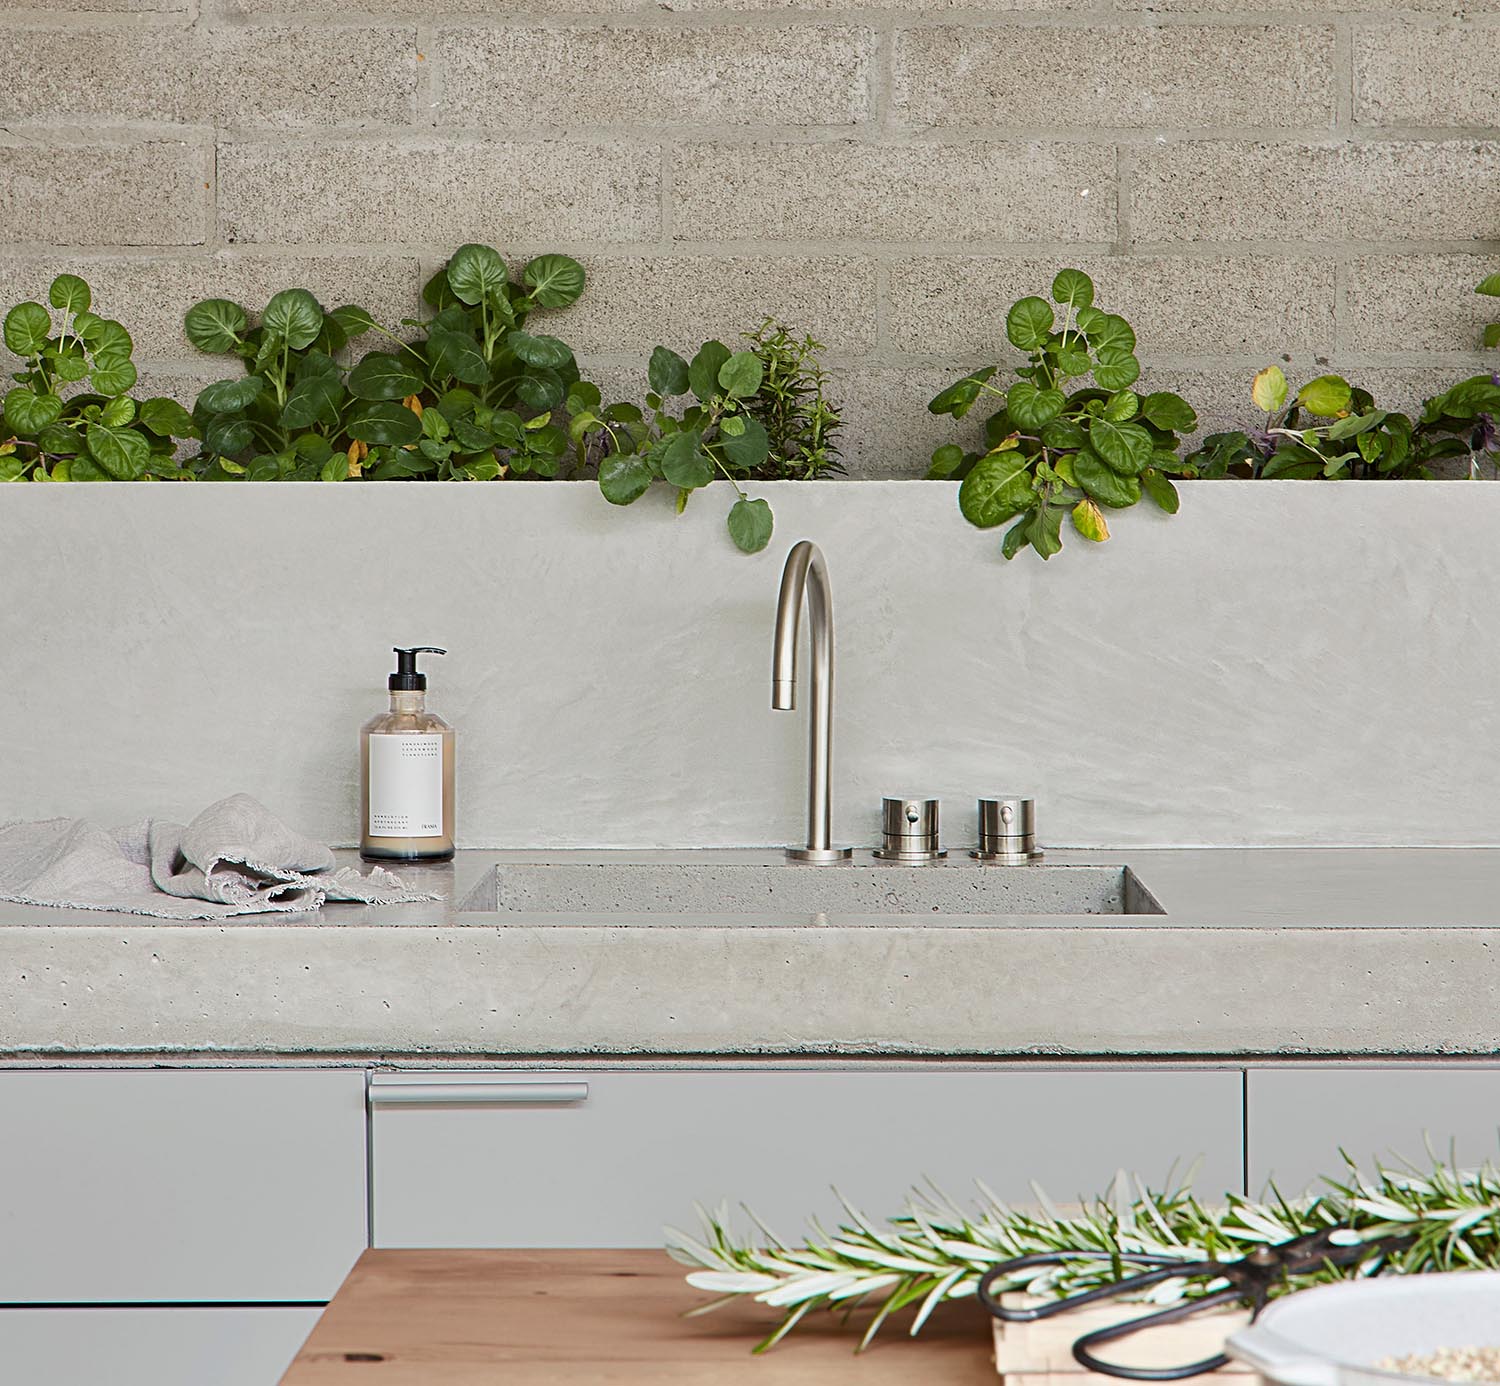 A modern concrete kitchen countertop with matching backsplash and a row of plants.